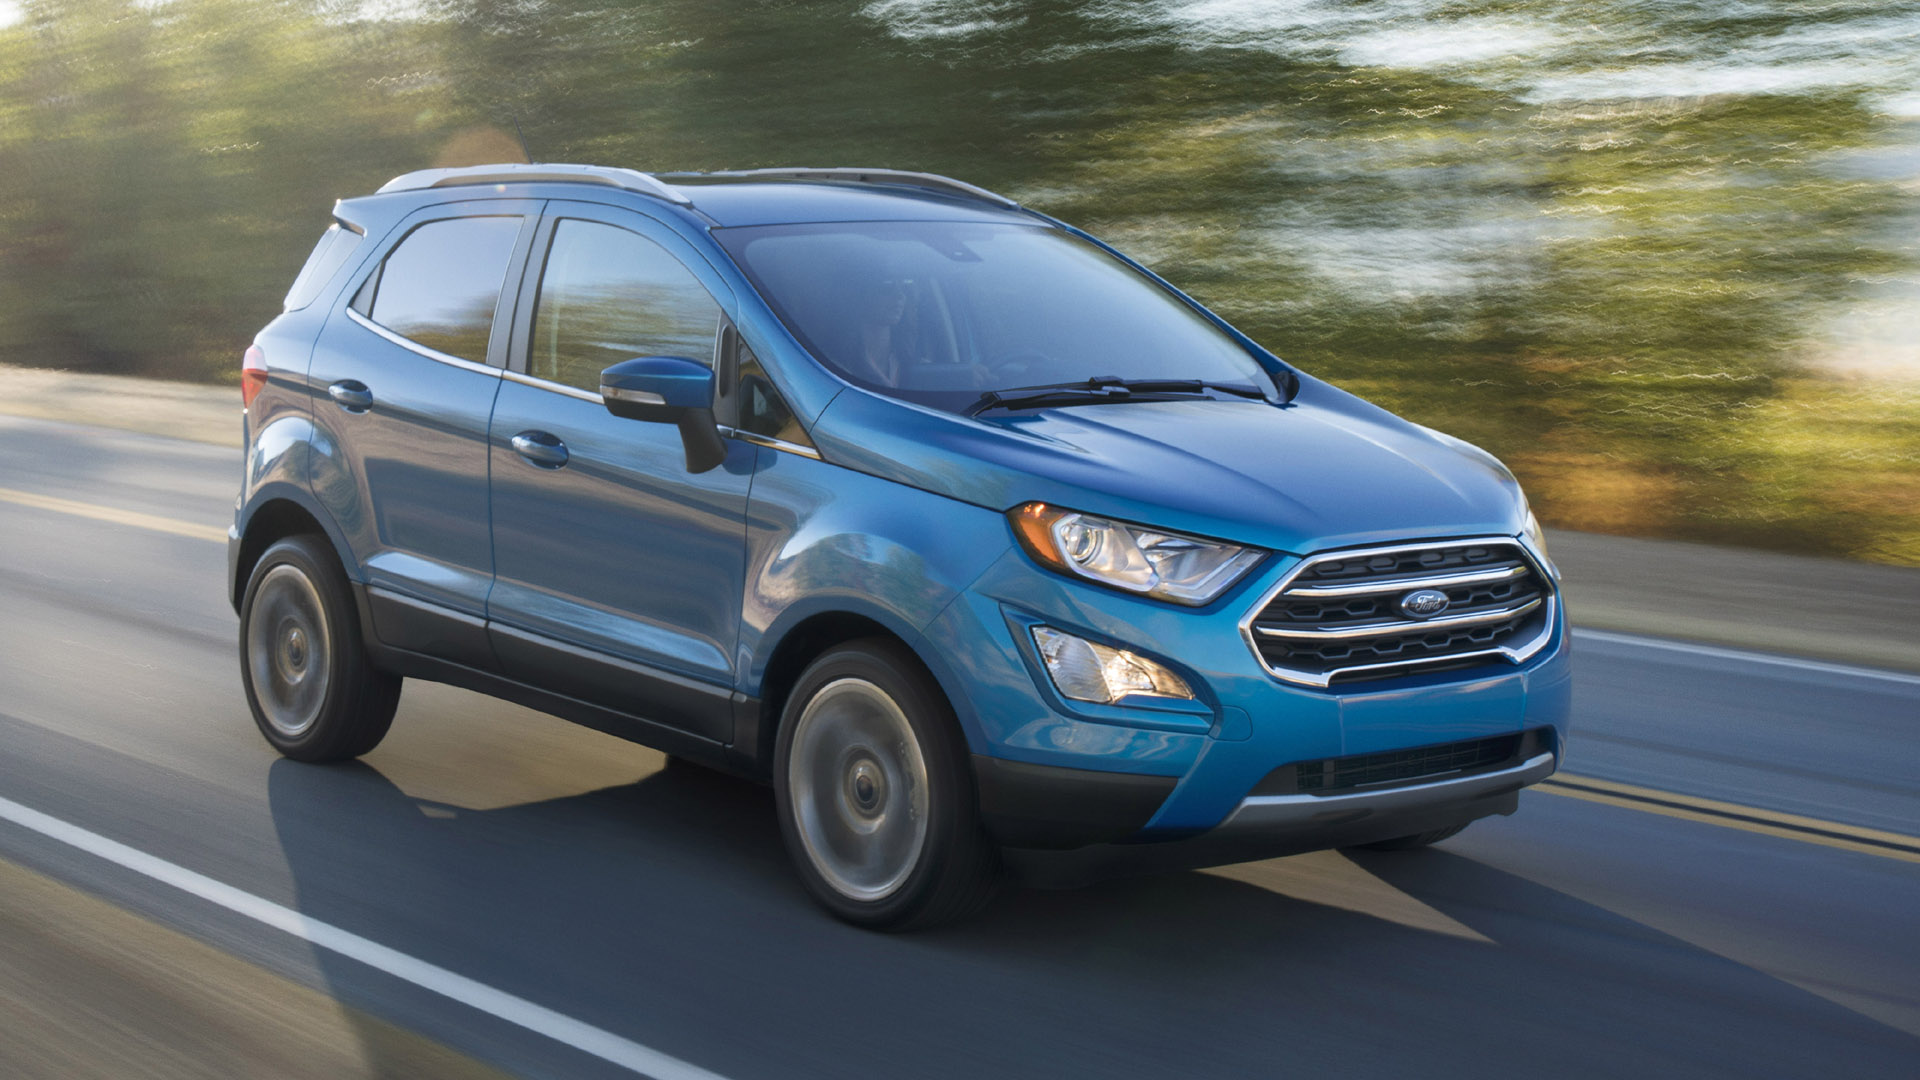 Diminutive Suv Joins Ford S North American Lineup 47abc